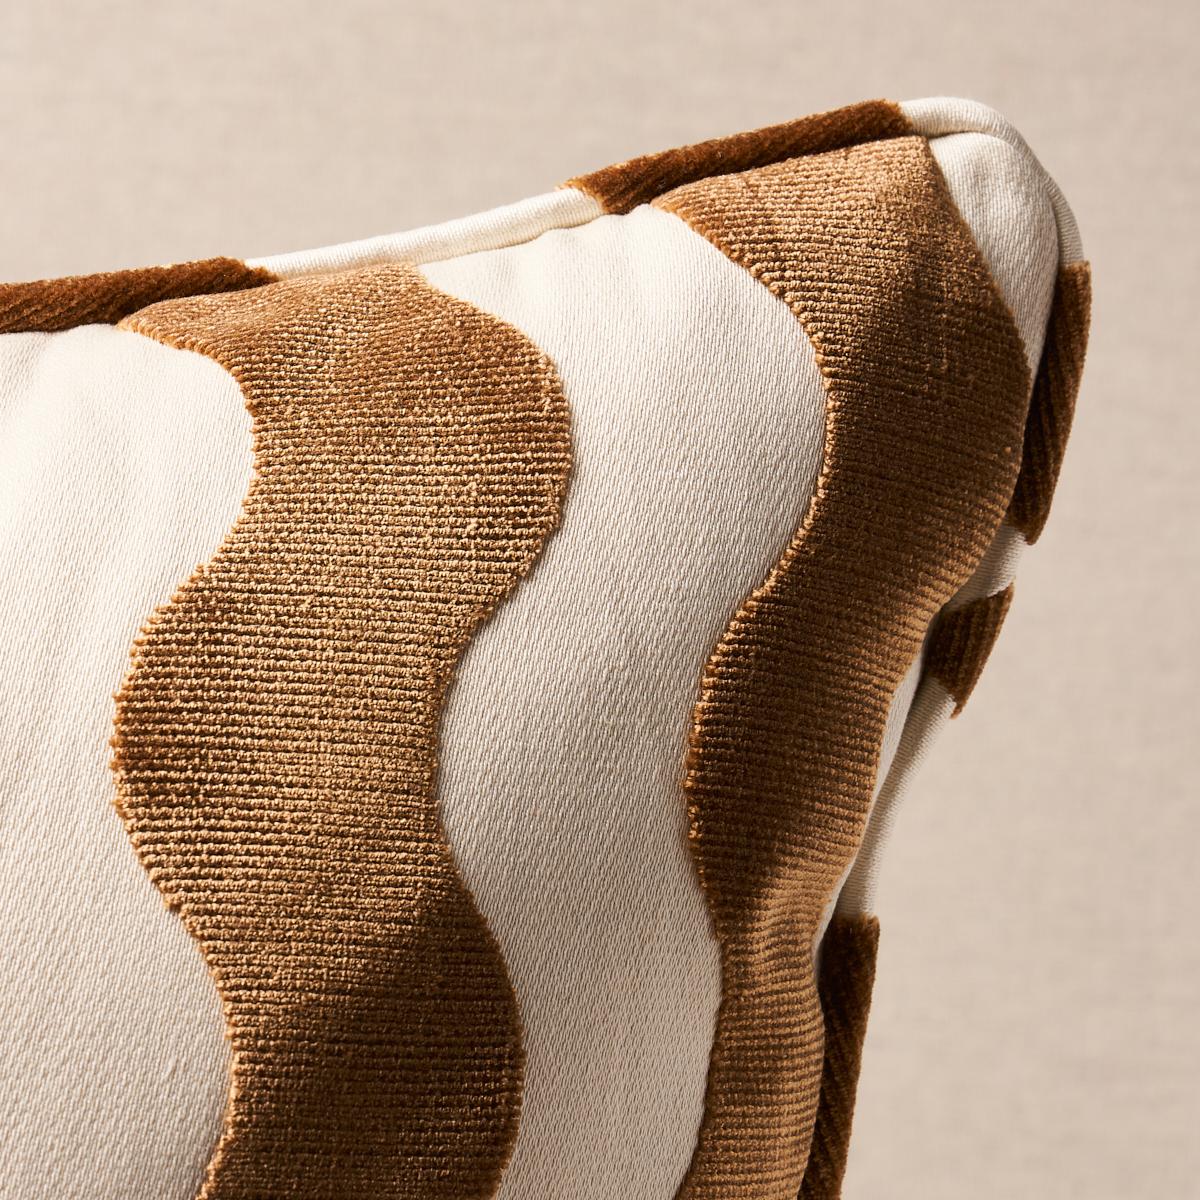 This pillow features The Wave Velvet by Miles Redd for Schumacher with a self welt finish. Pierre Cardin and Yves Saint Laurent designs from the 1970s inspired The Wave in camel, a chic and graphic cut velvet fabric created by Miles Redd. Pillow